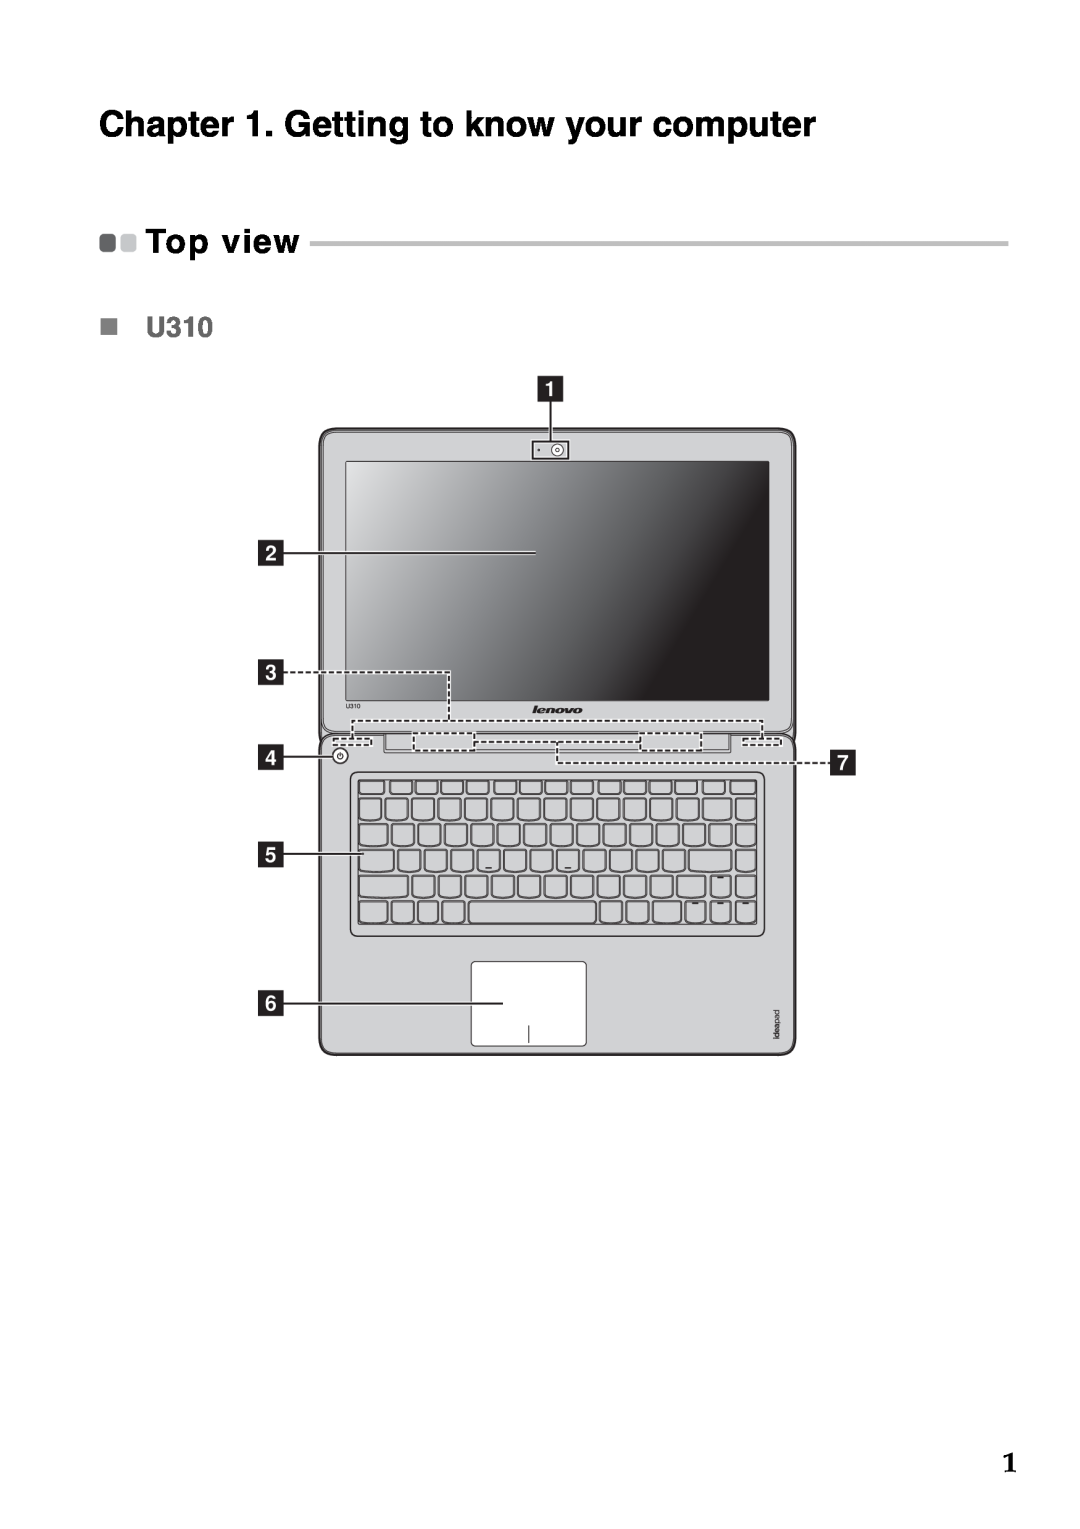 Lenovo U410 manual Getting to know your computer, „ U310, Top view, a b c d g e f 